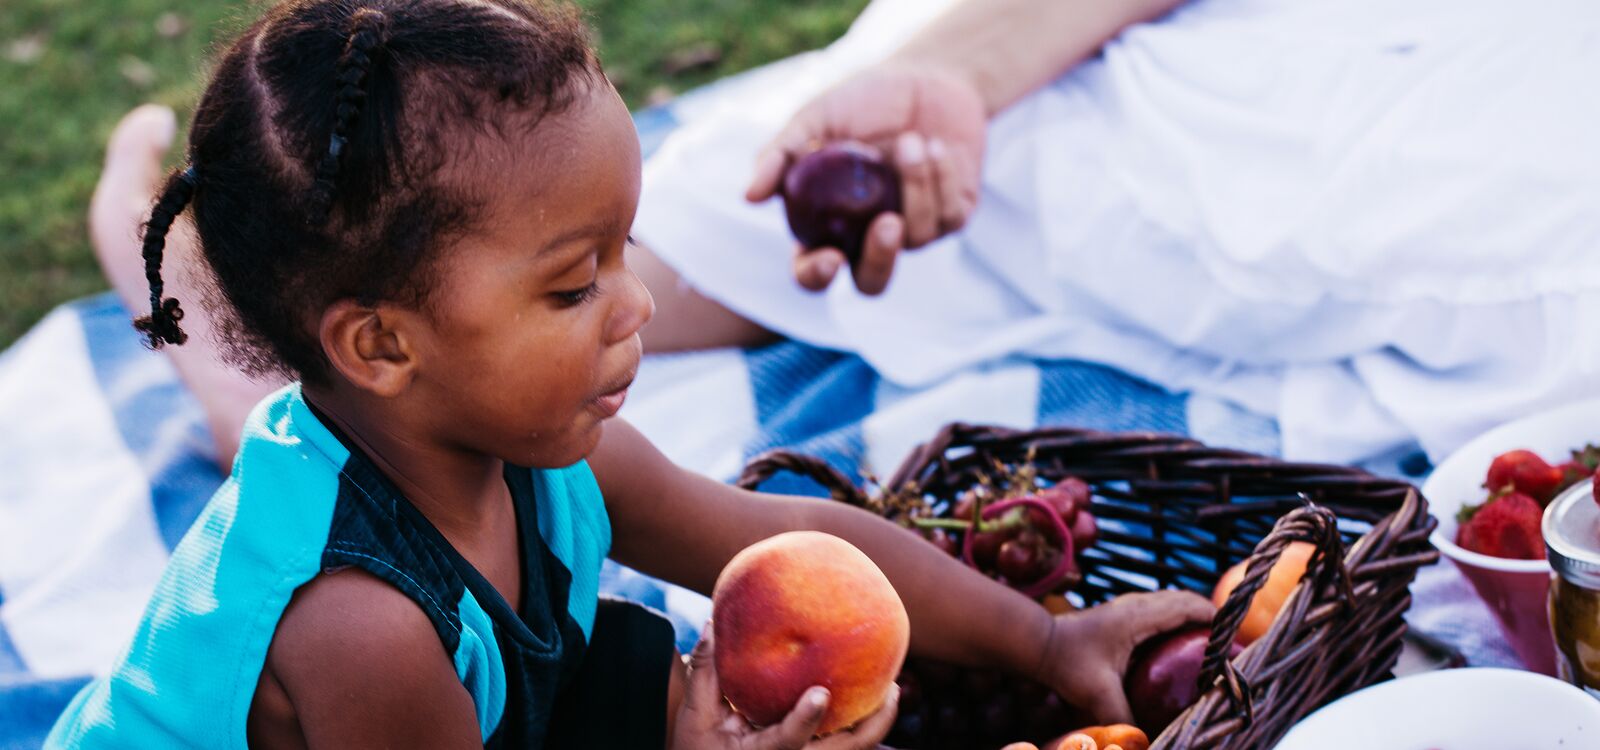 A child holds a peach while sitting on a picnic blanket